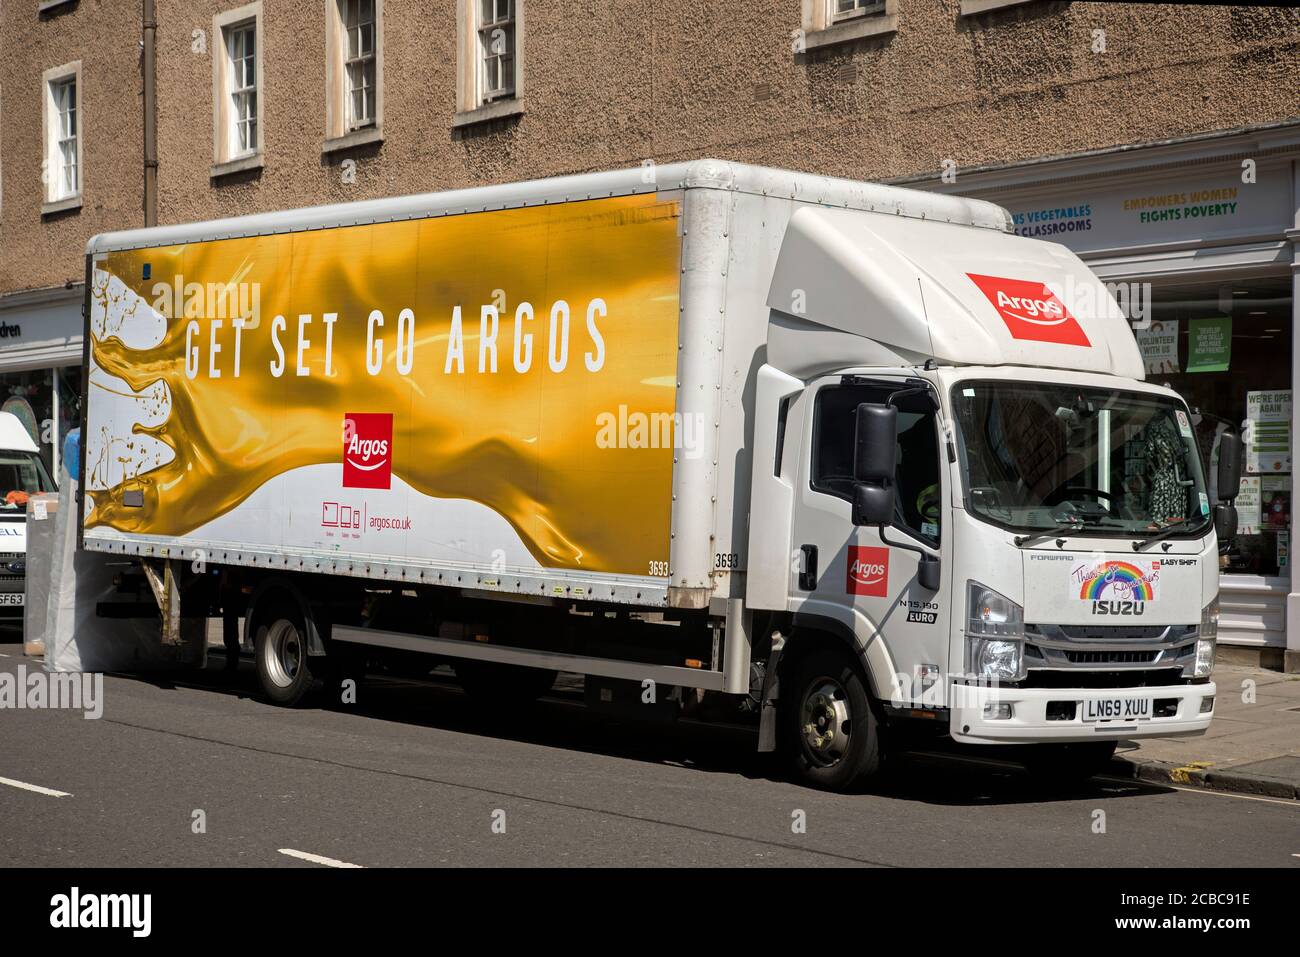 Argos HGV delivery truck parked in a street in Edinburgh, Scotland, UK. Stock Photo